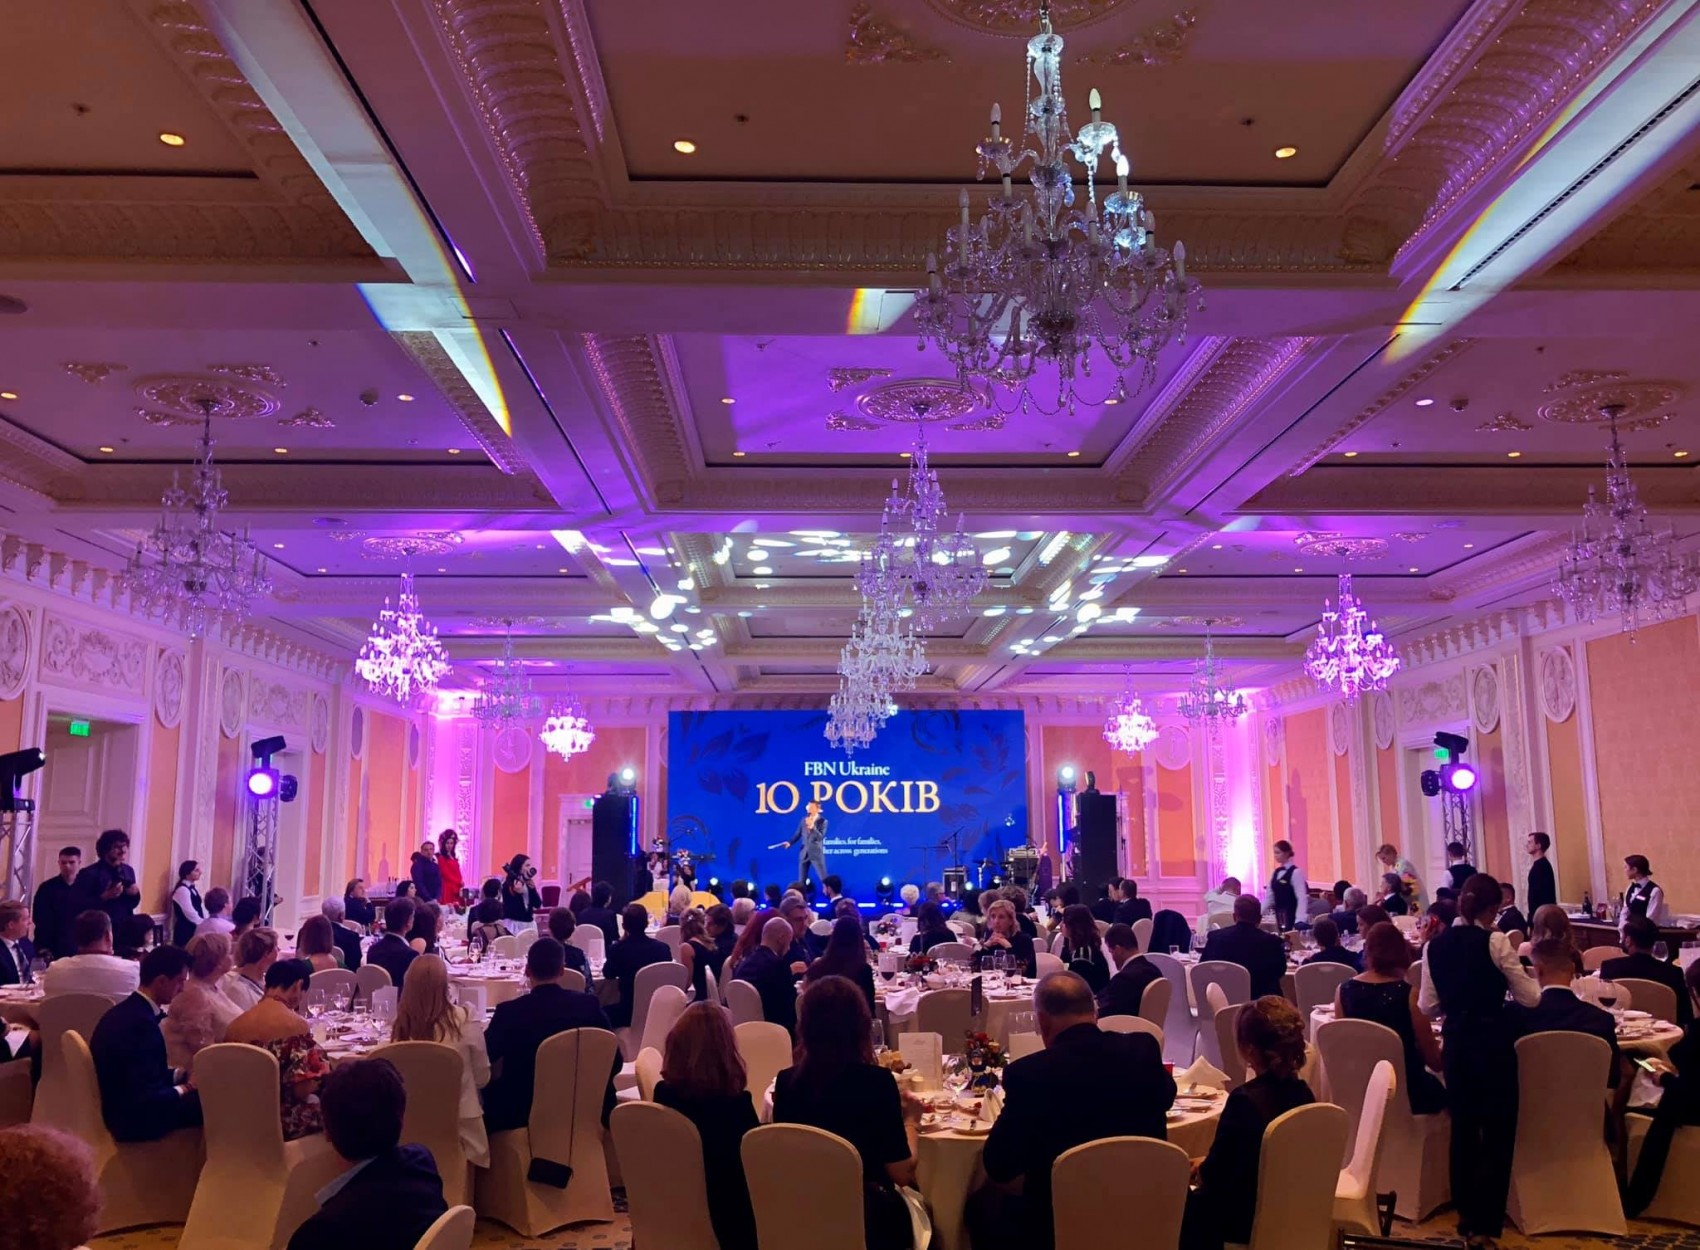 On December 7, the solemn ceremony of awarding the best family business in 2019 was held